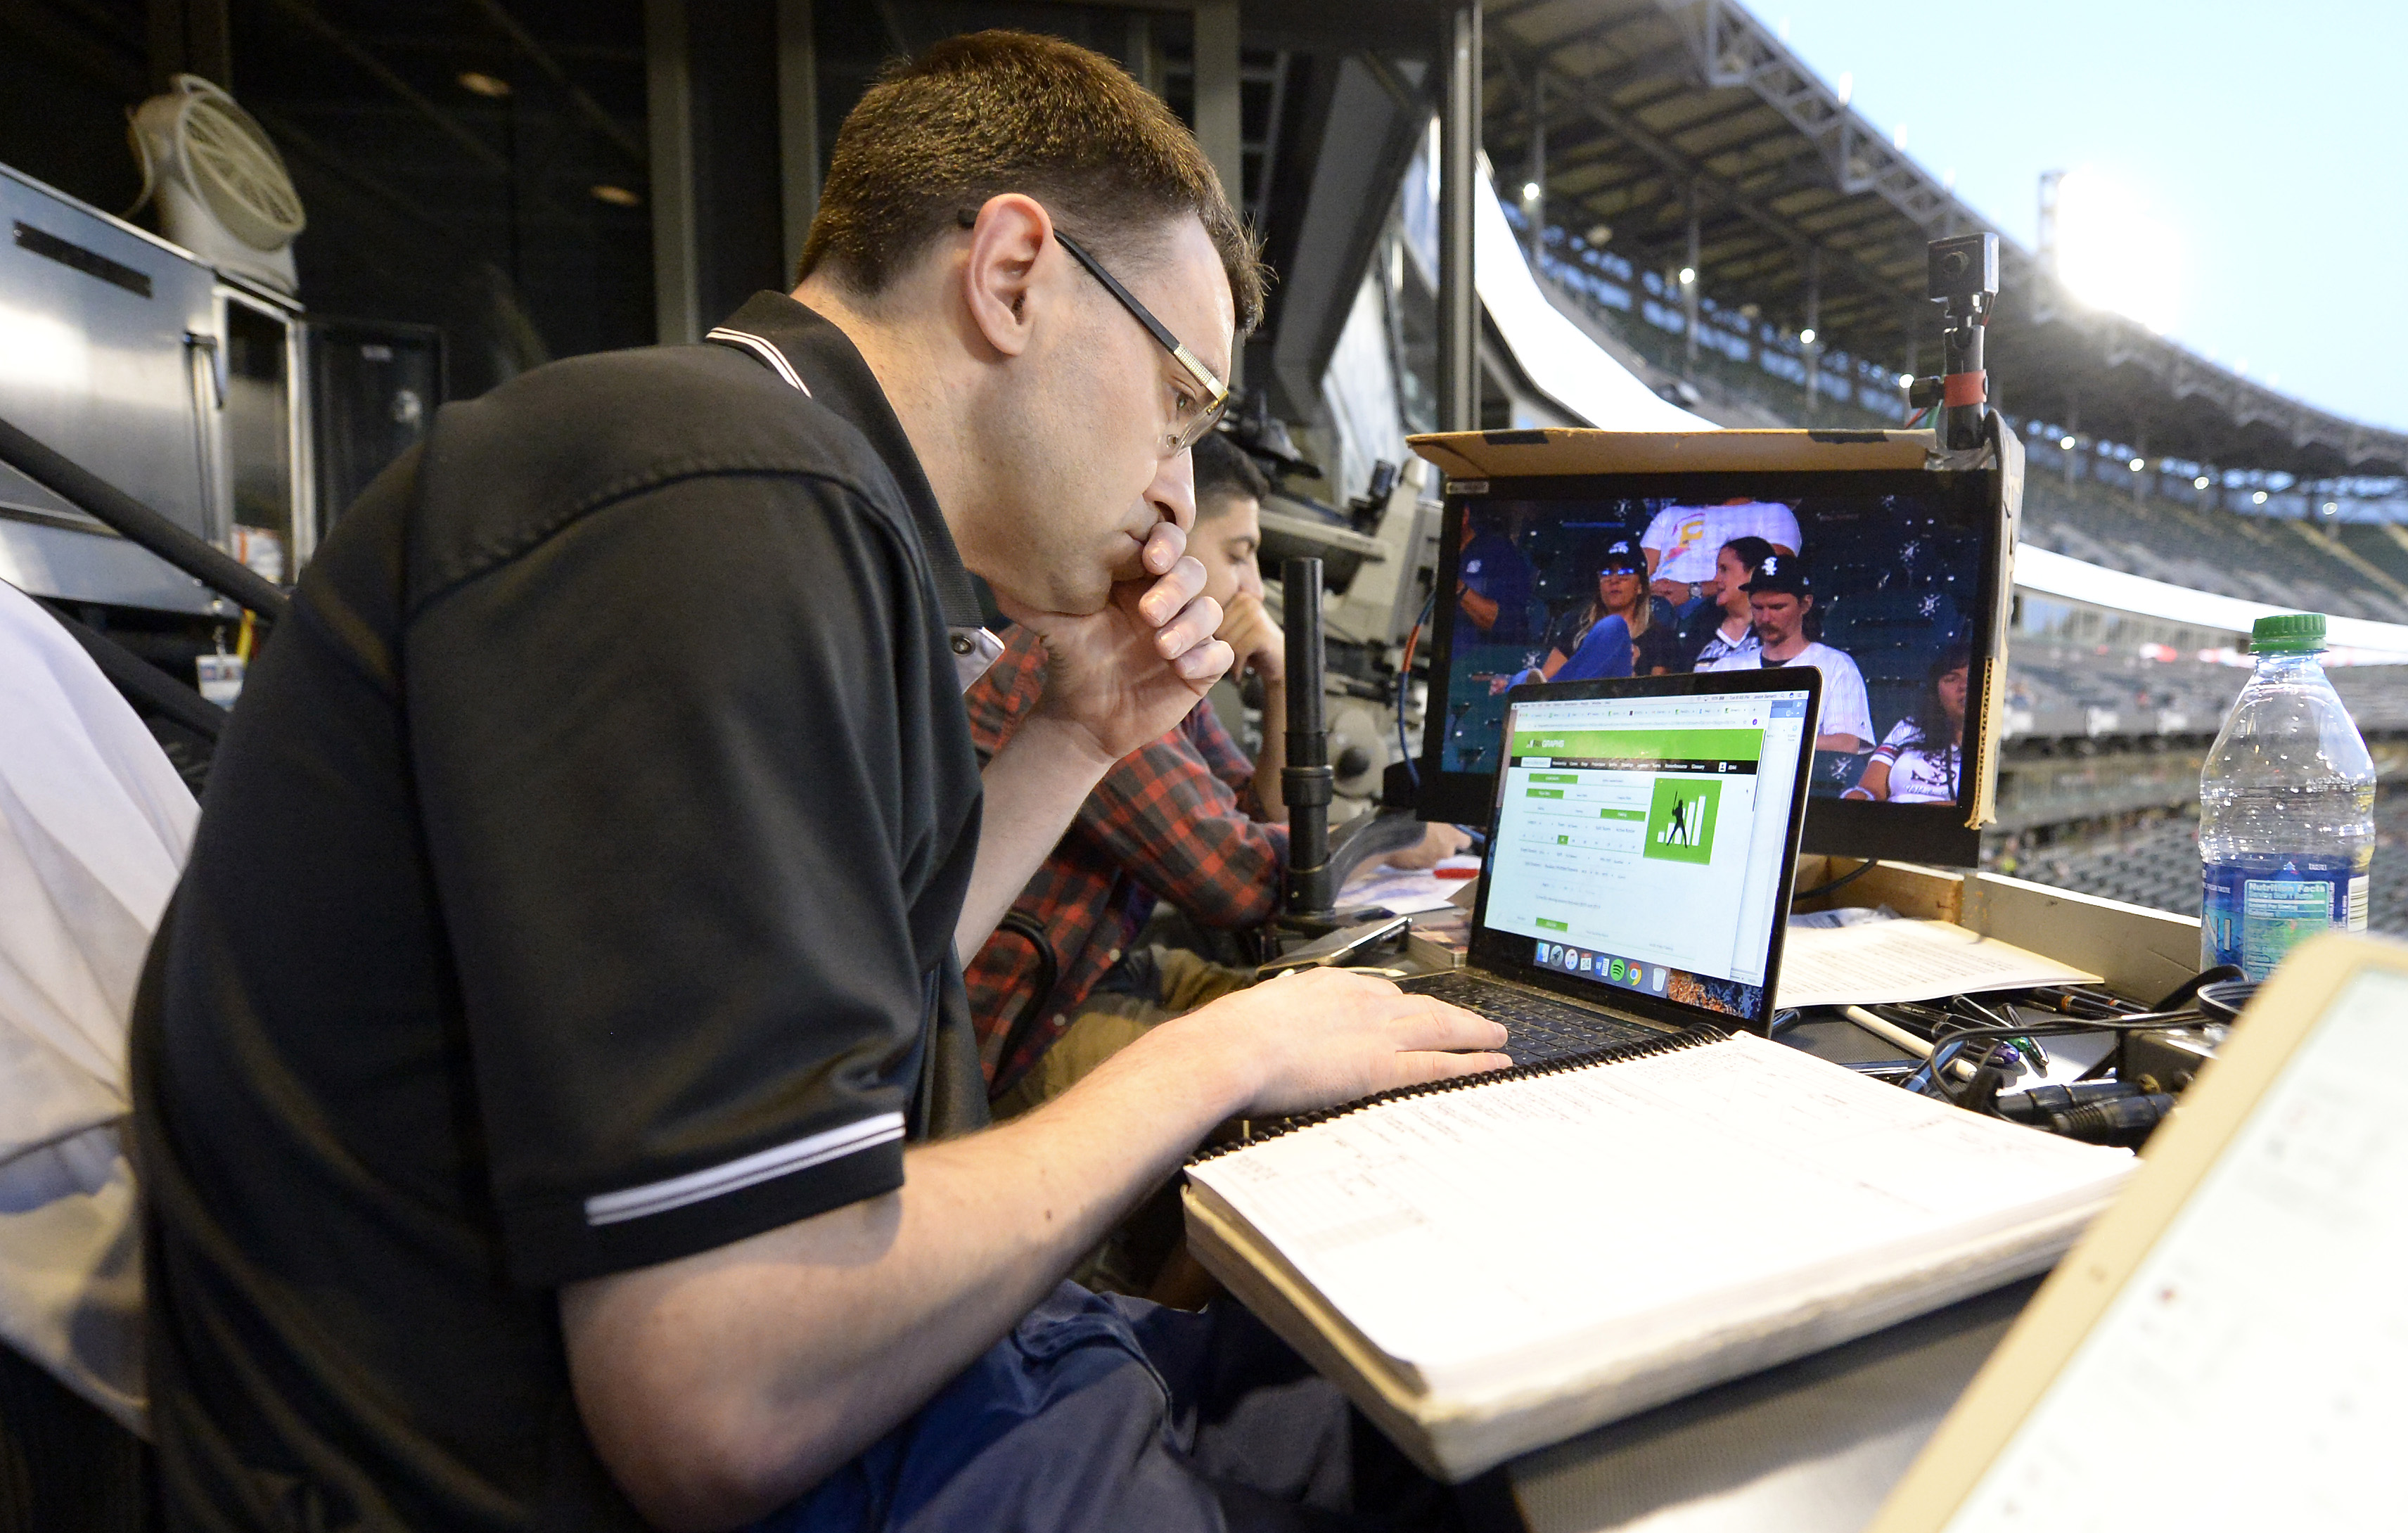 Sports announcer Jason Benetti on being a voice for those with